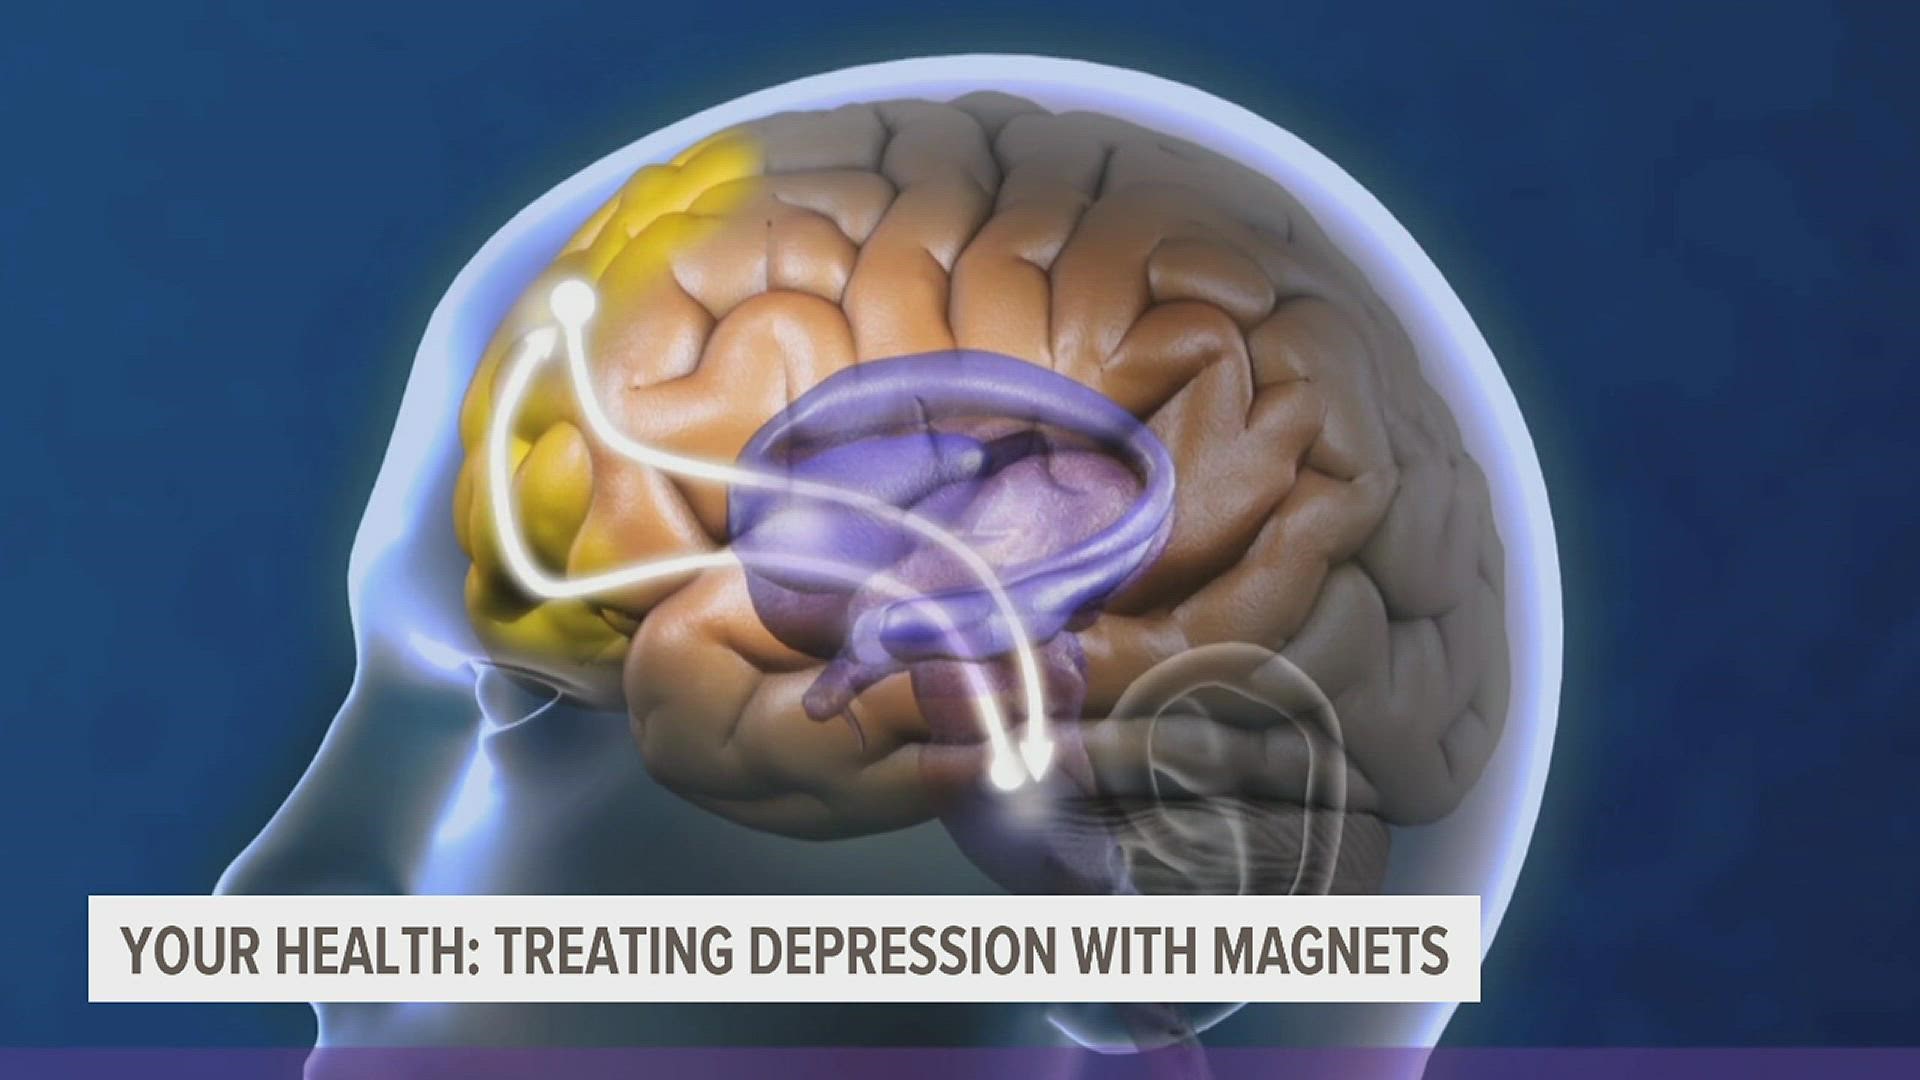 For some patients, supervised, short pulses of magnetic energy are helping unlock a world beyond major depressive disorder.